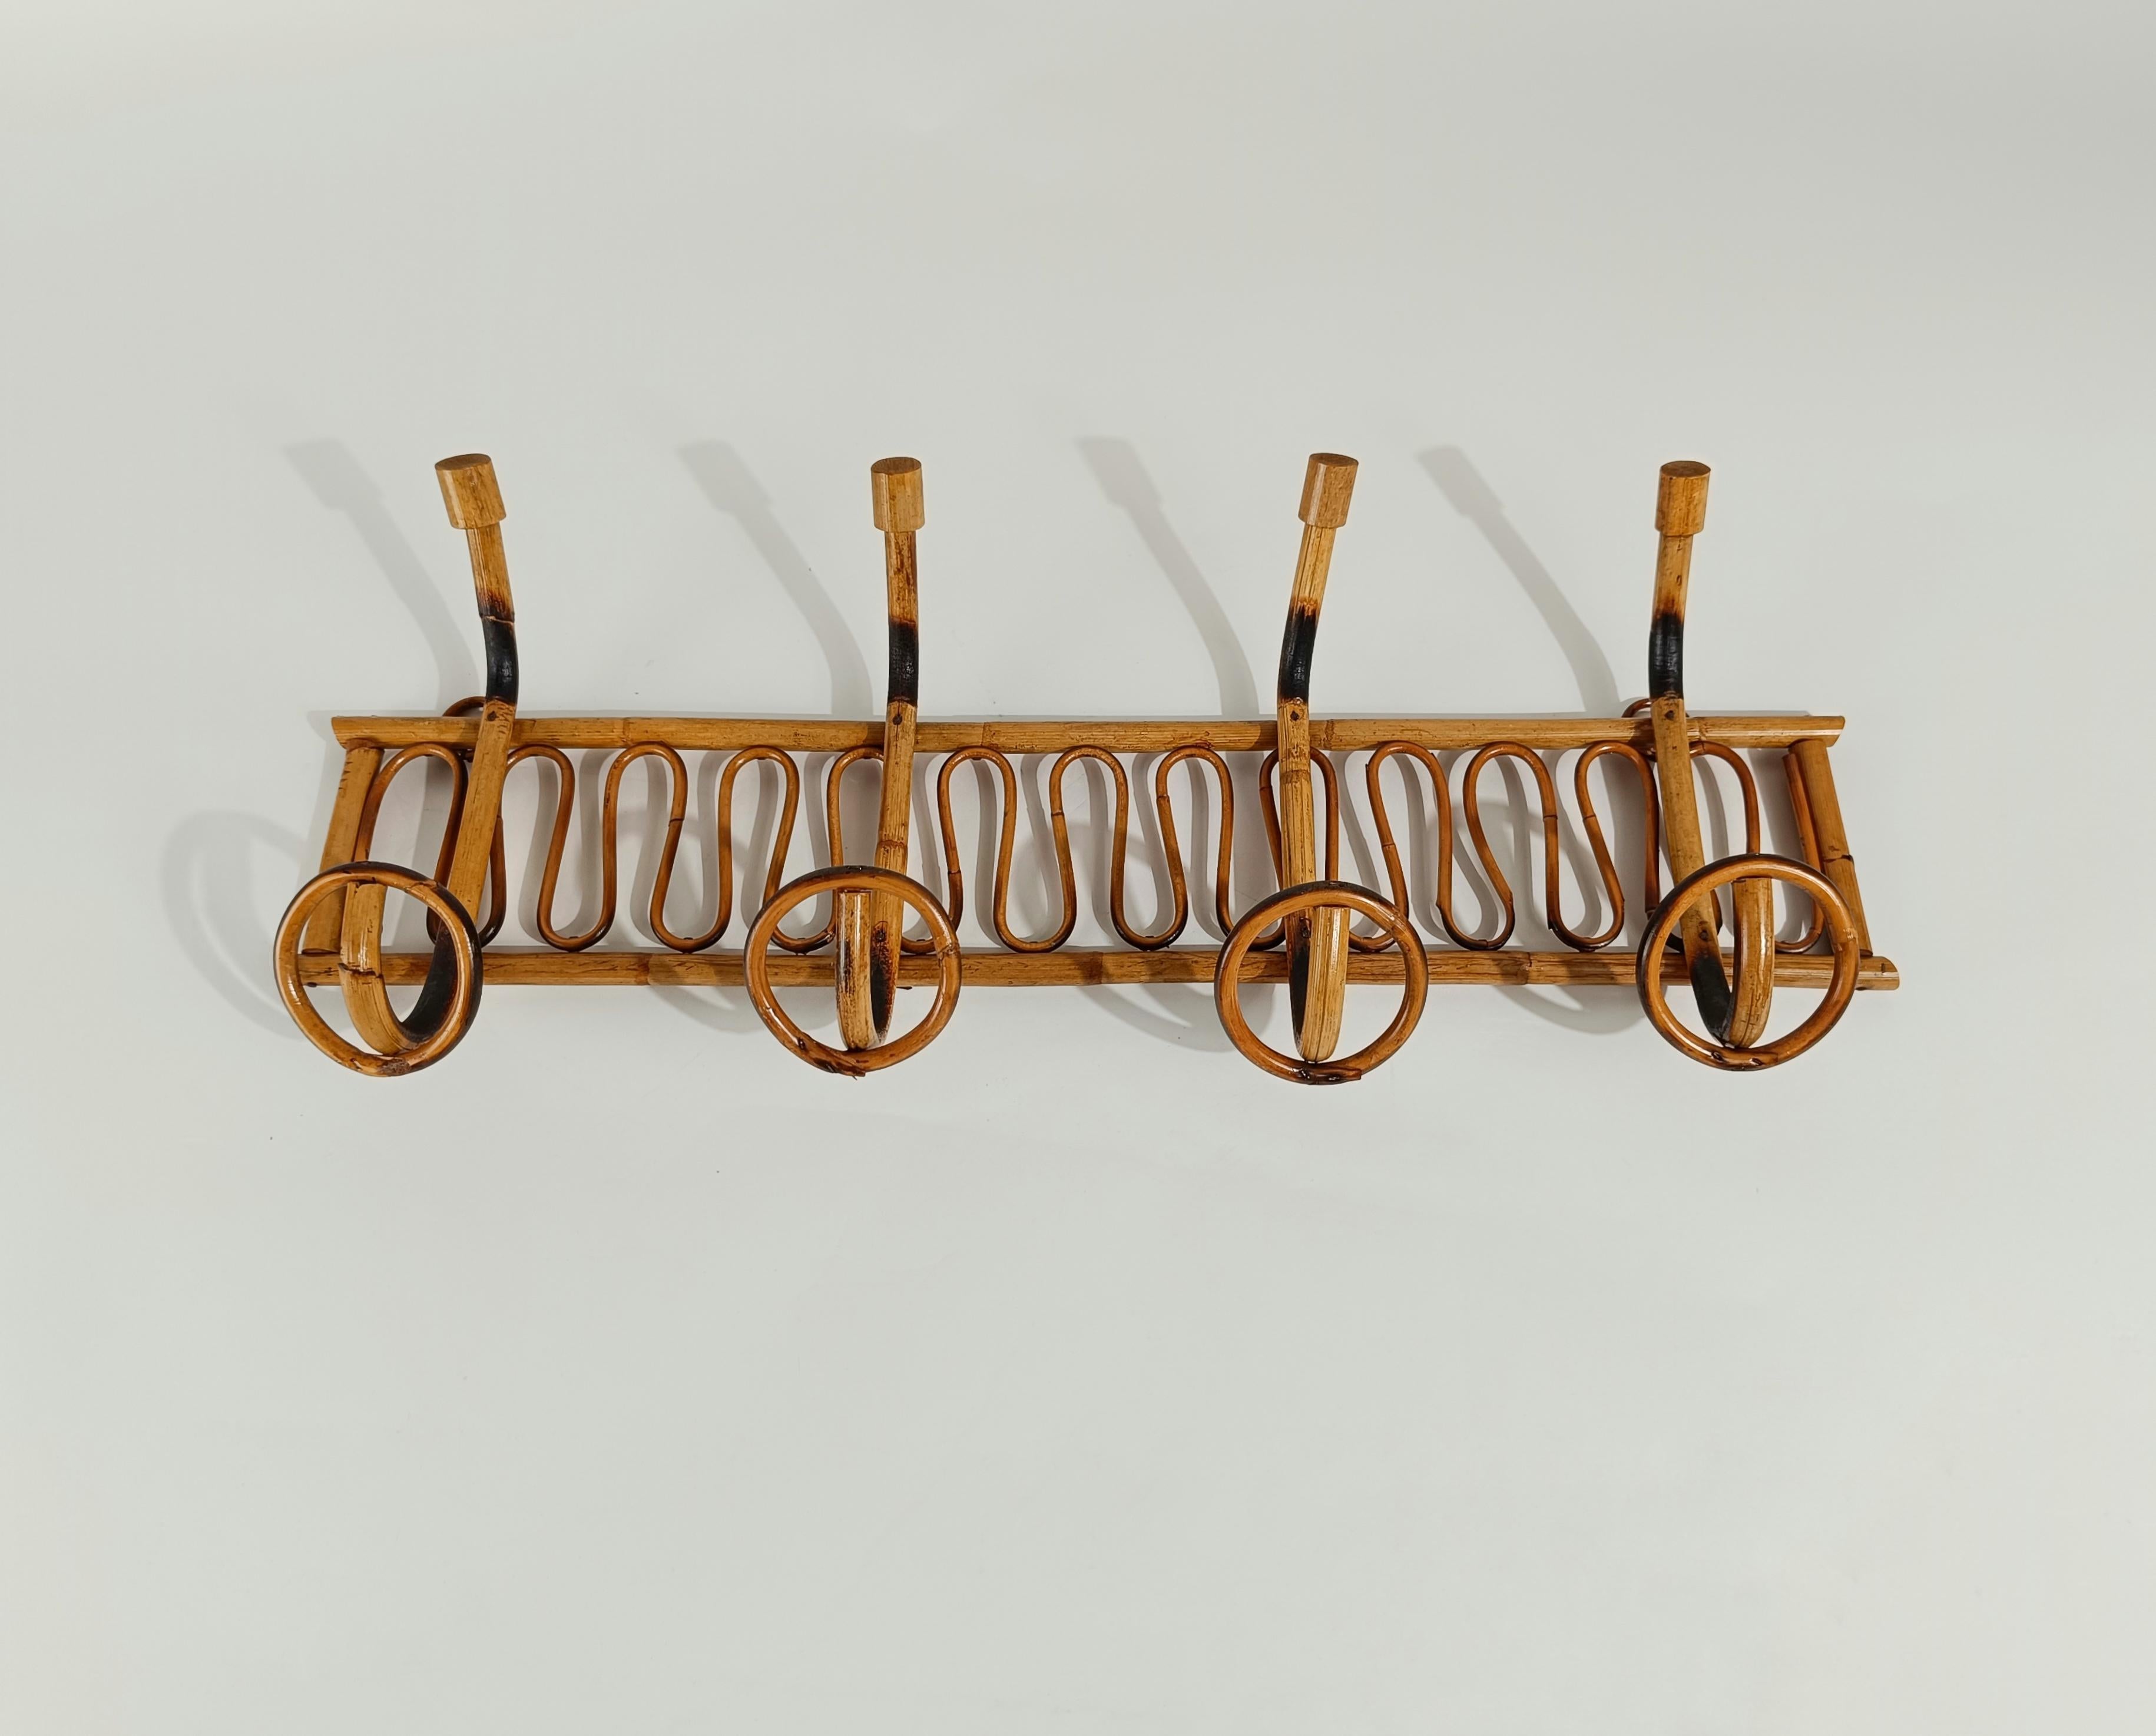 Midcentury Italian Riviera Rattan and Bamboo Wall Coat Rack / Wall Hanger 1960s For Sale 3